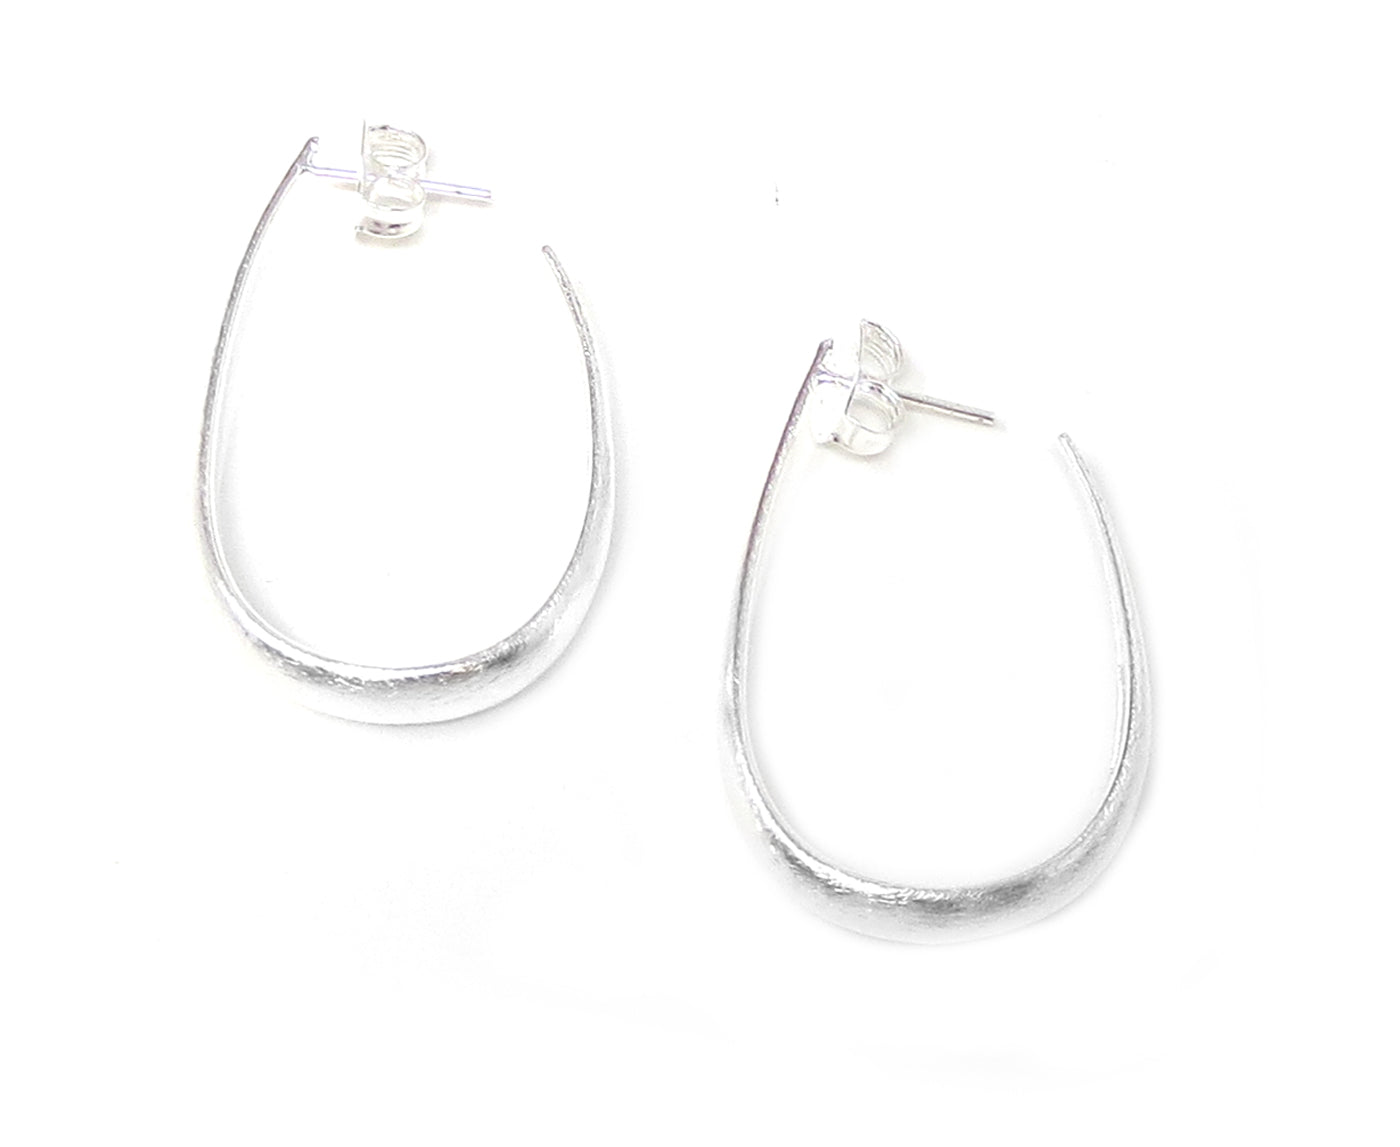 Biarritz 1.5 Inch Oval Oblong Hoops NB602 - in Gold or Silver